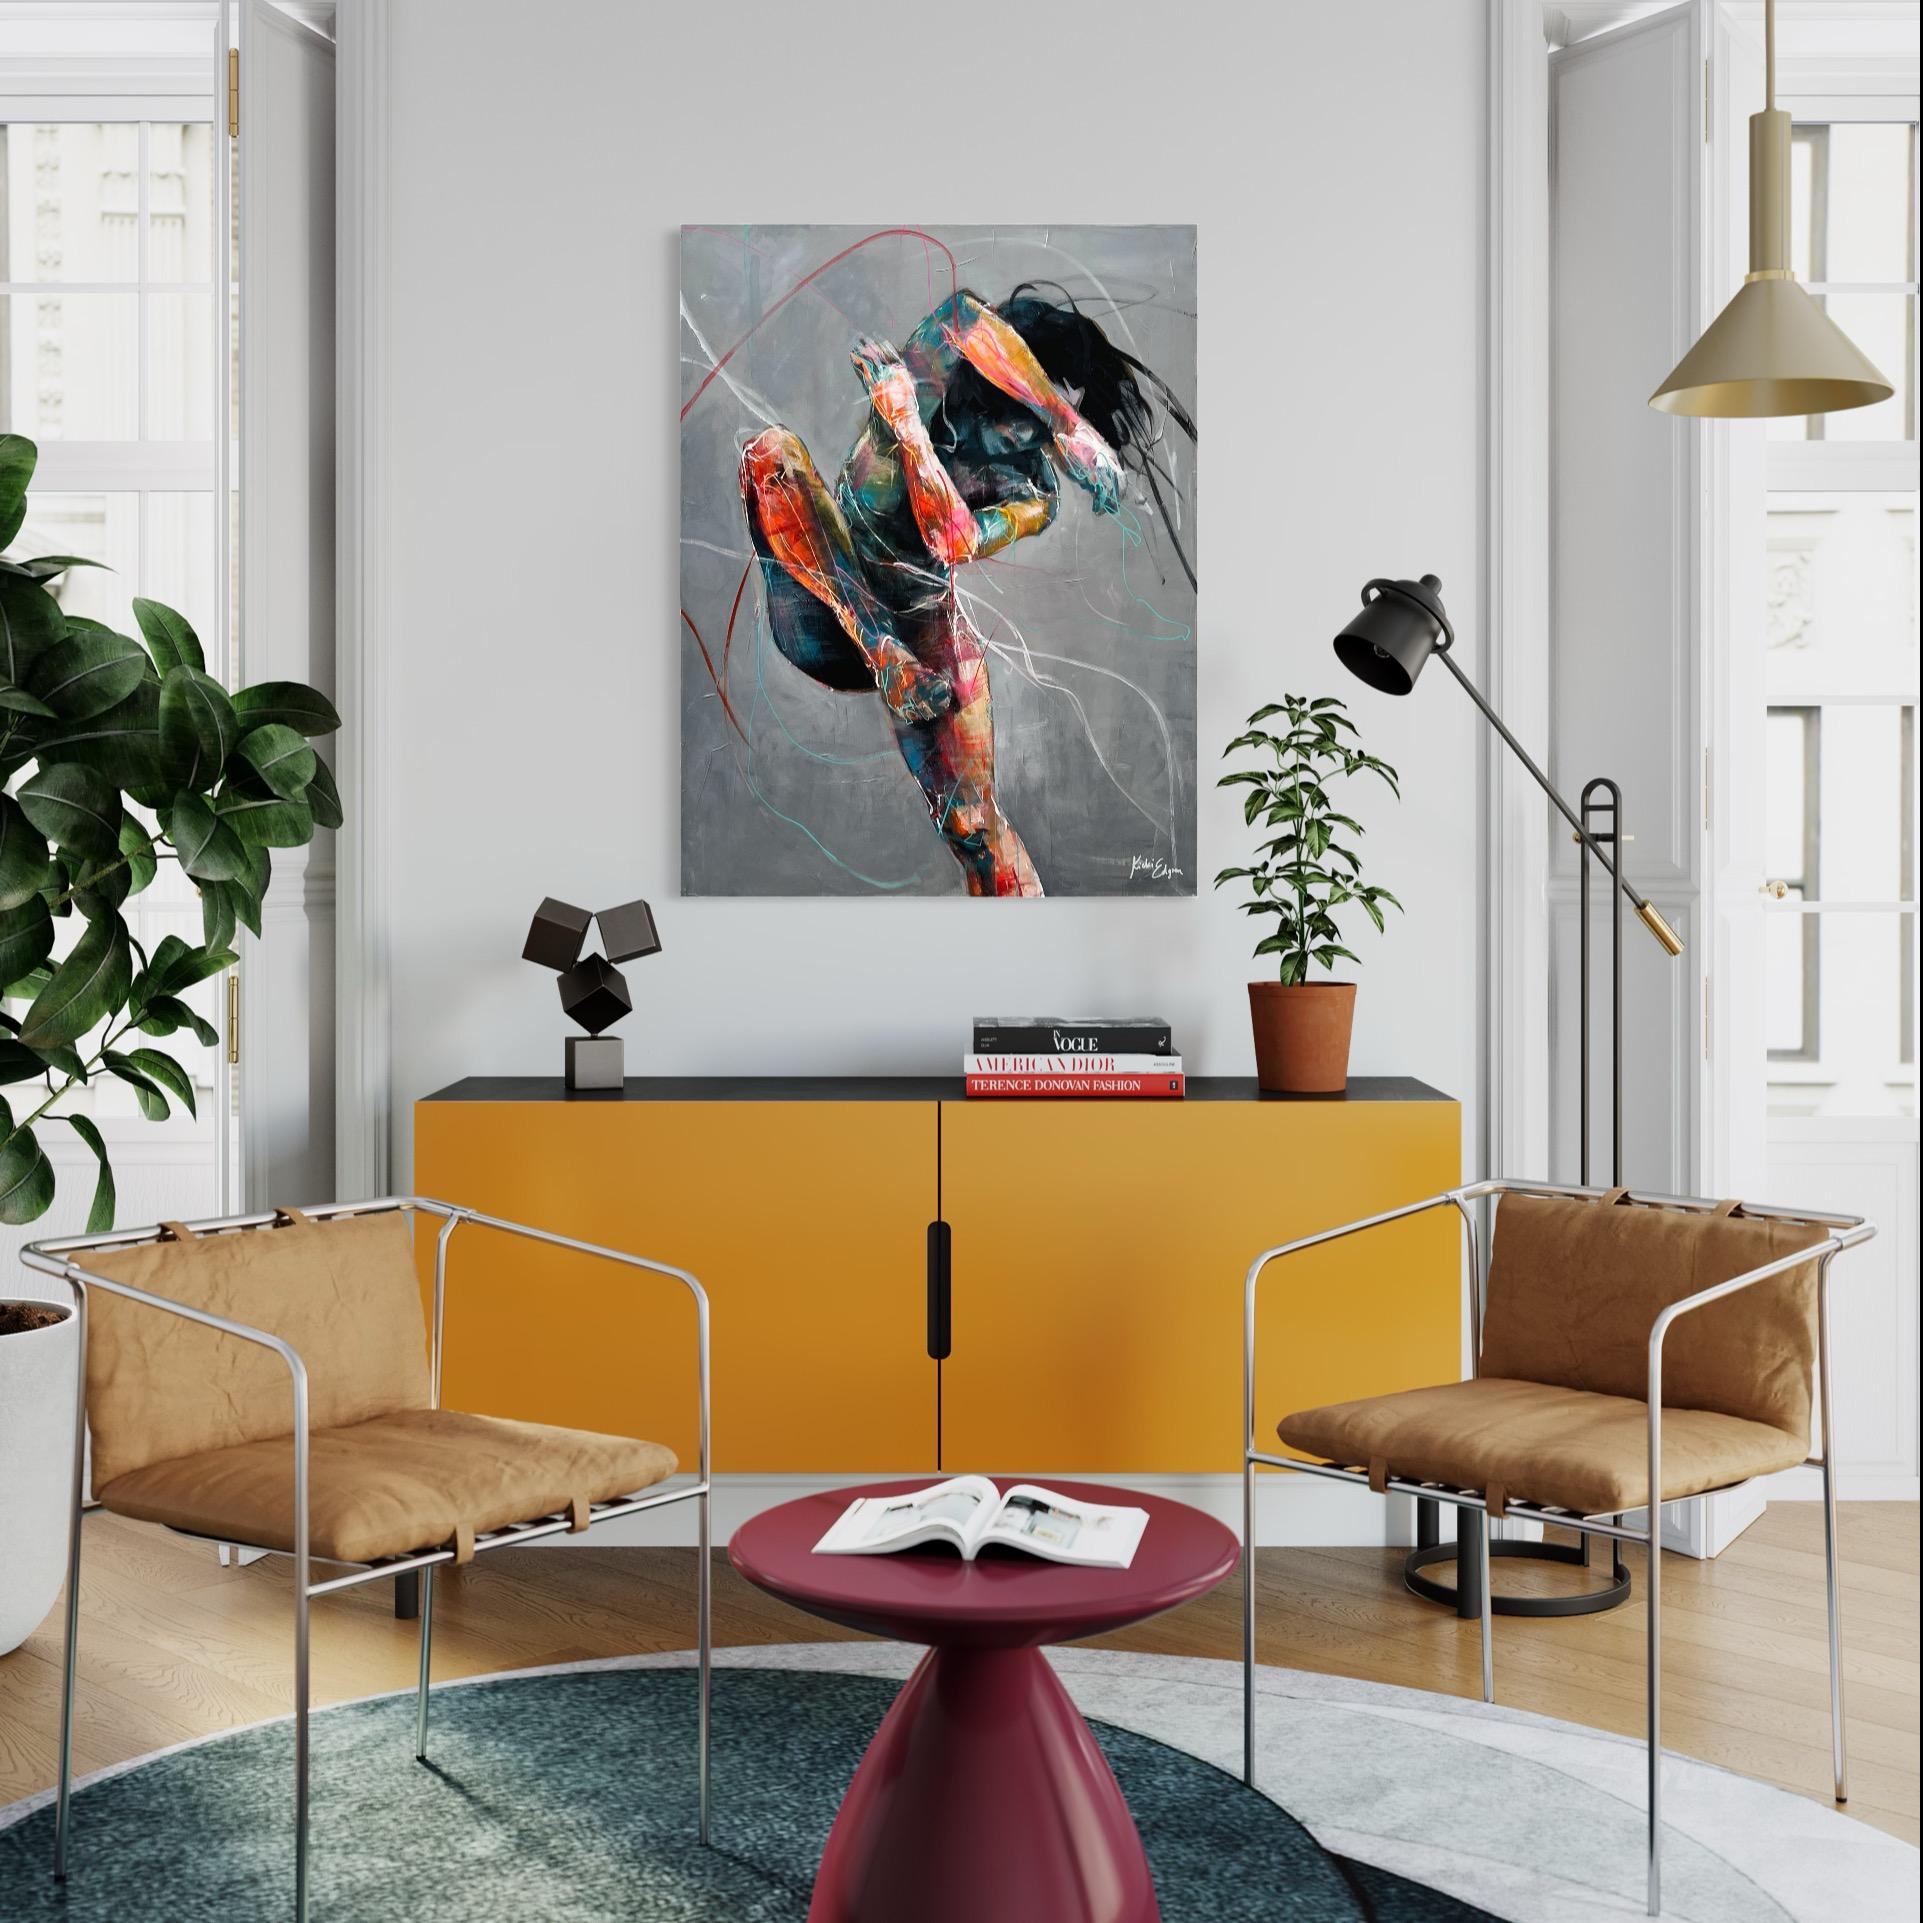 This vertical, figurative acrylic painting measures 45 inches high and 35 inches wide. It is wired and ready to hang. It is hand signed by the artist on the back of the artwork. This piece would be an excellent addition to any collection.

Kicki